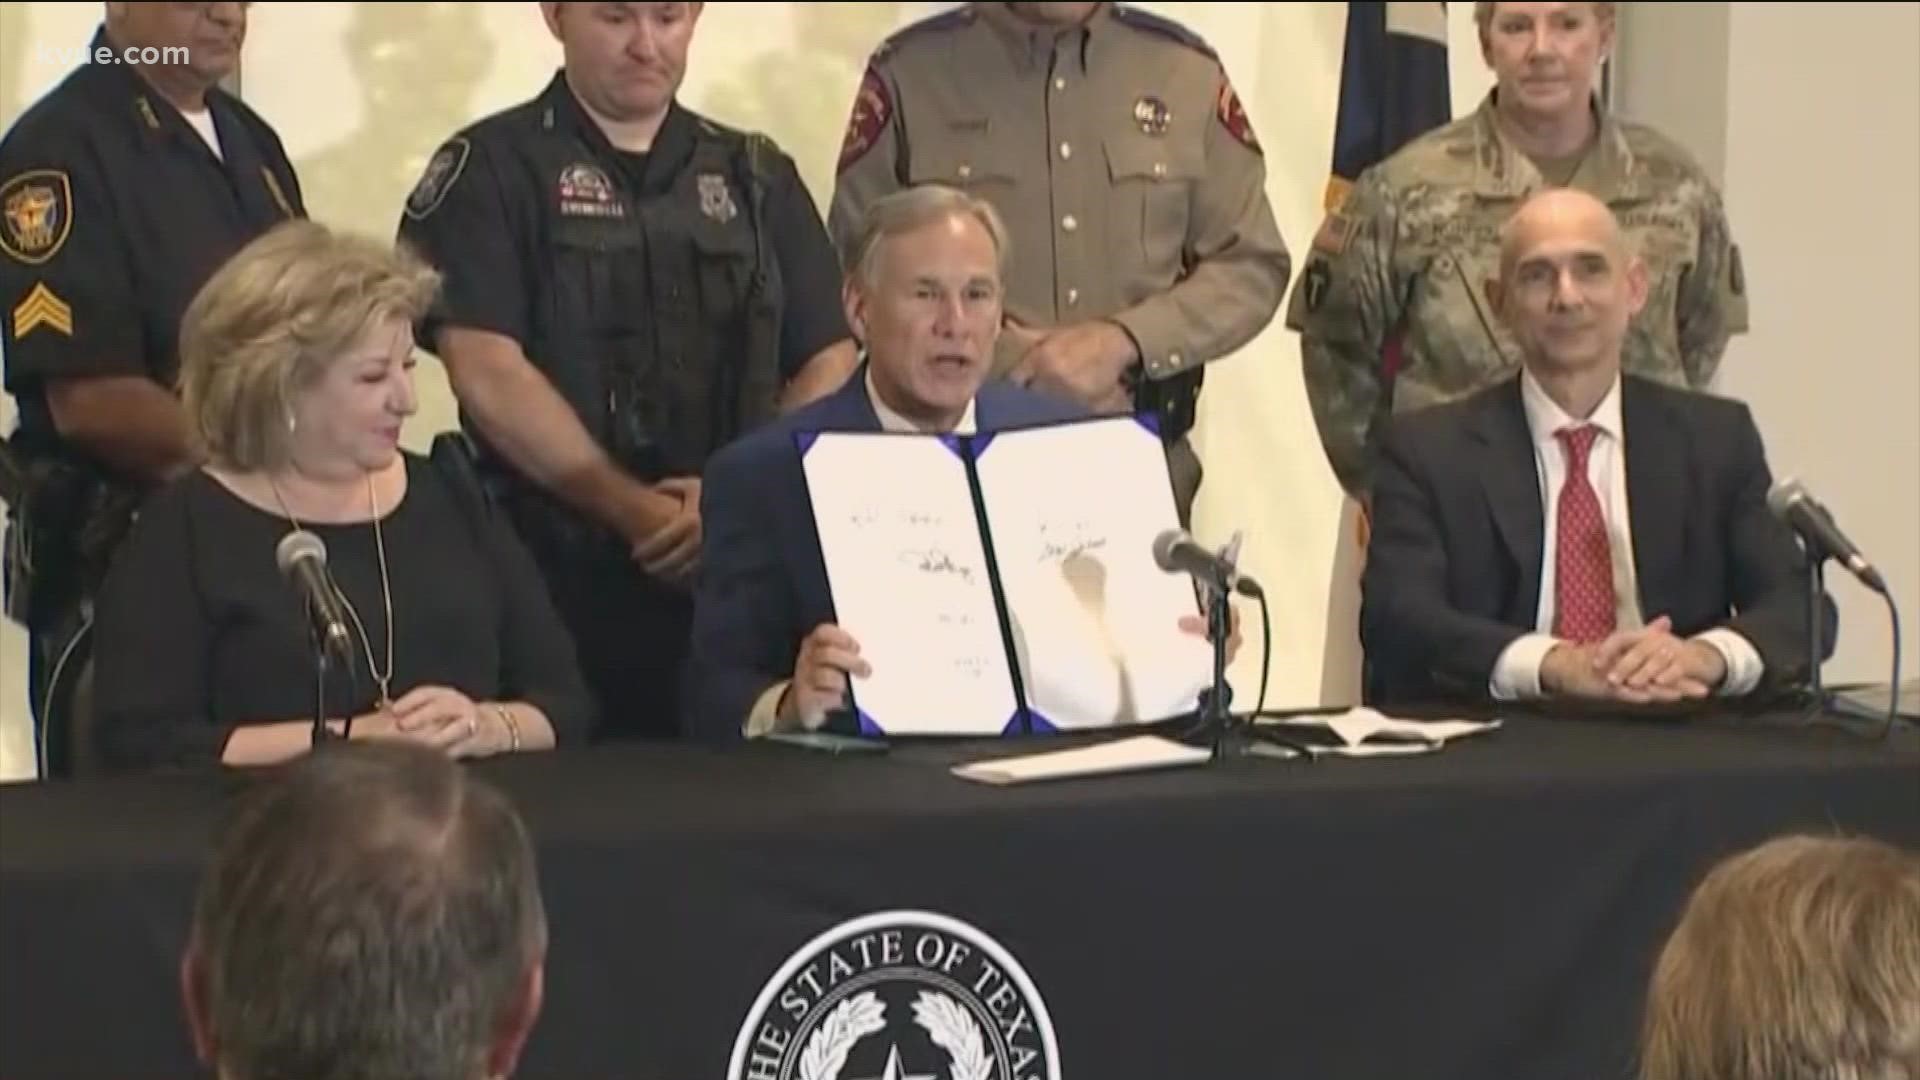 Gov. Greg Abbott signed House Bill 9 into law on Friday, spending another $1.8 billion on border security over the next two years.